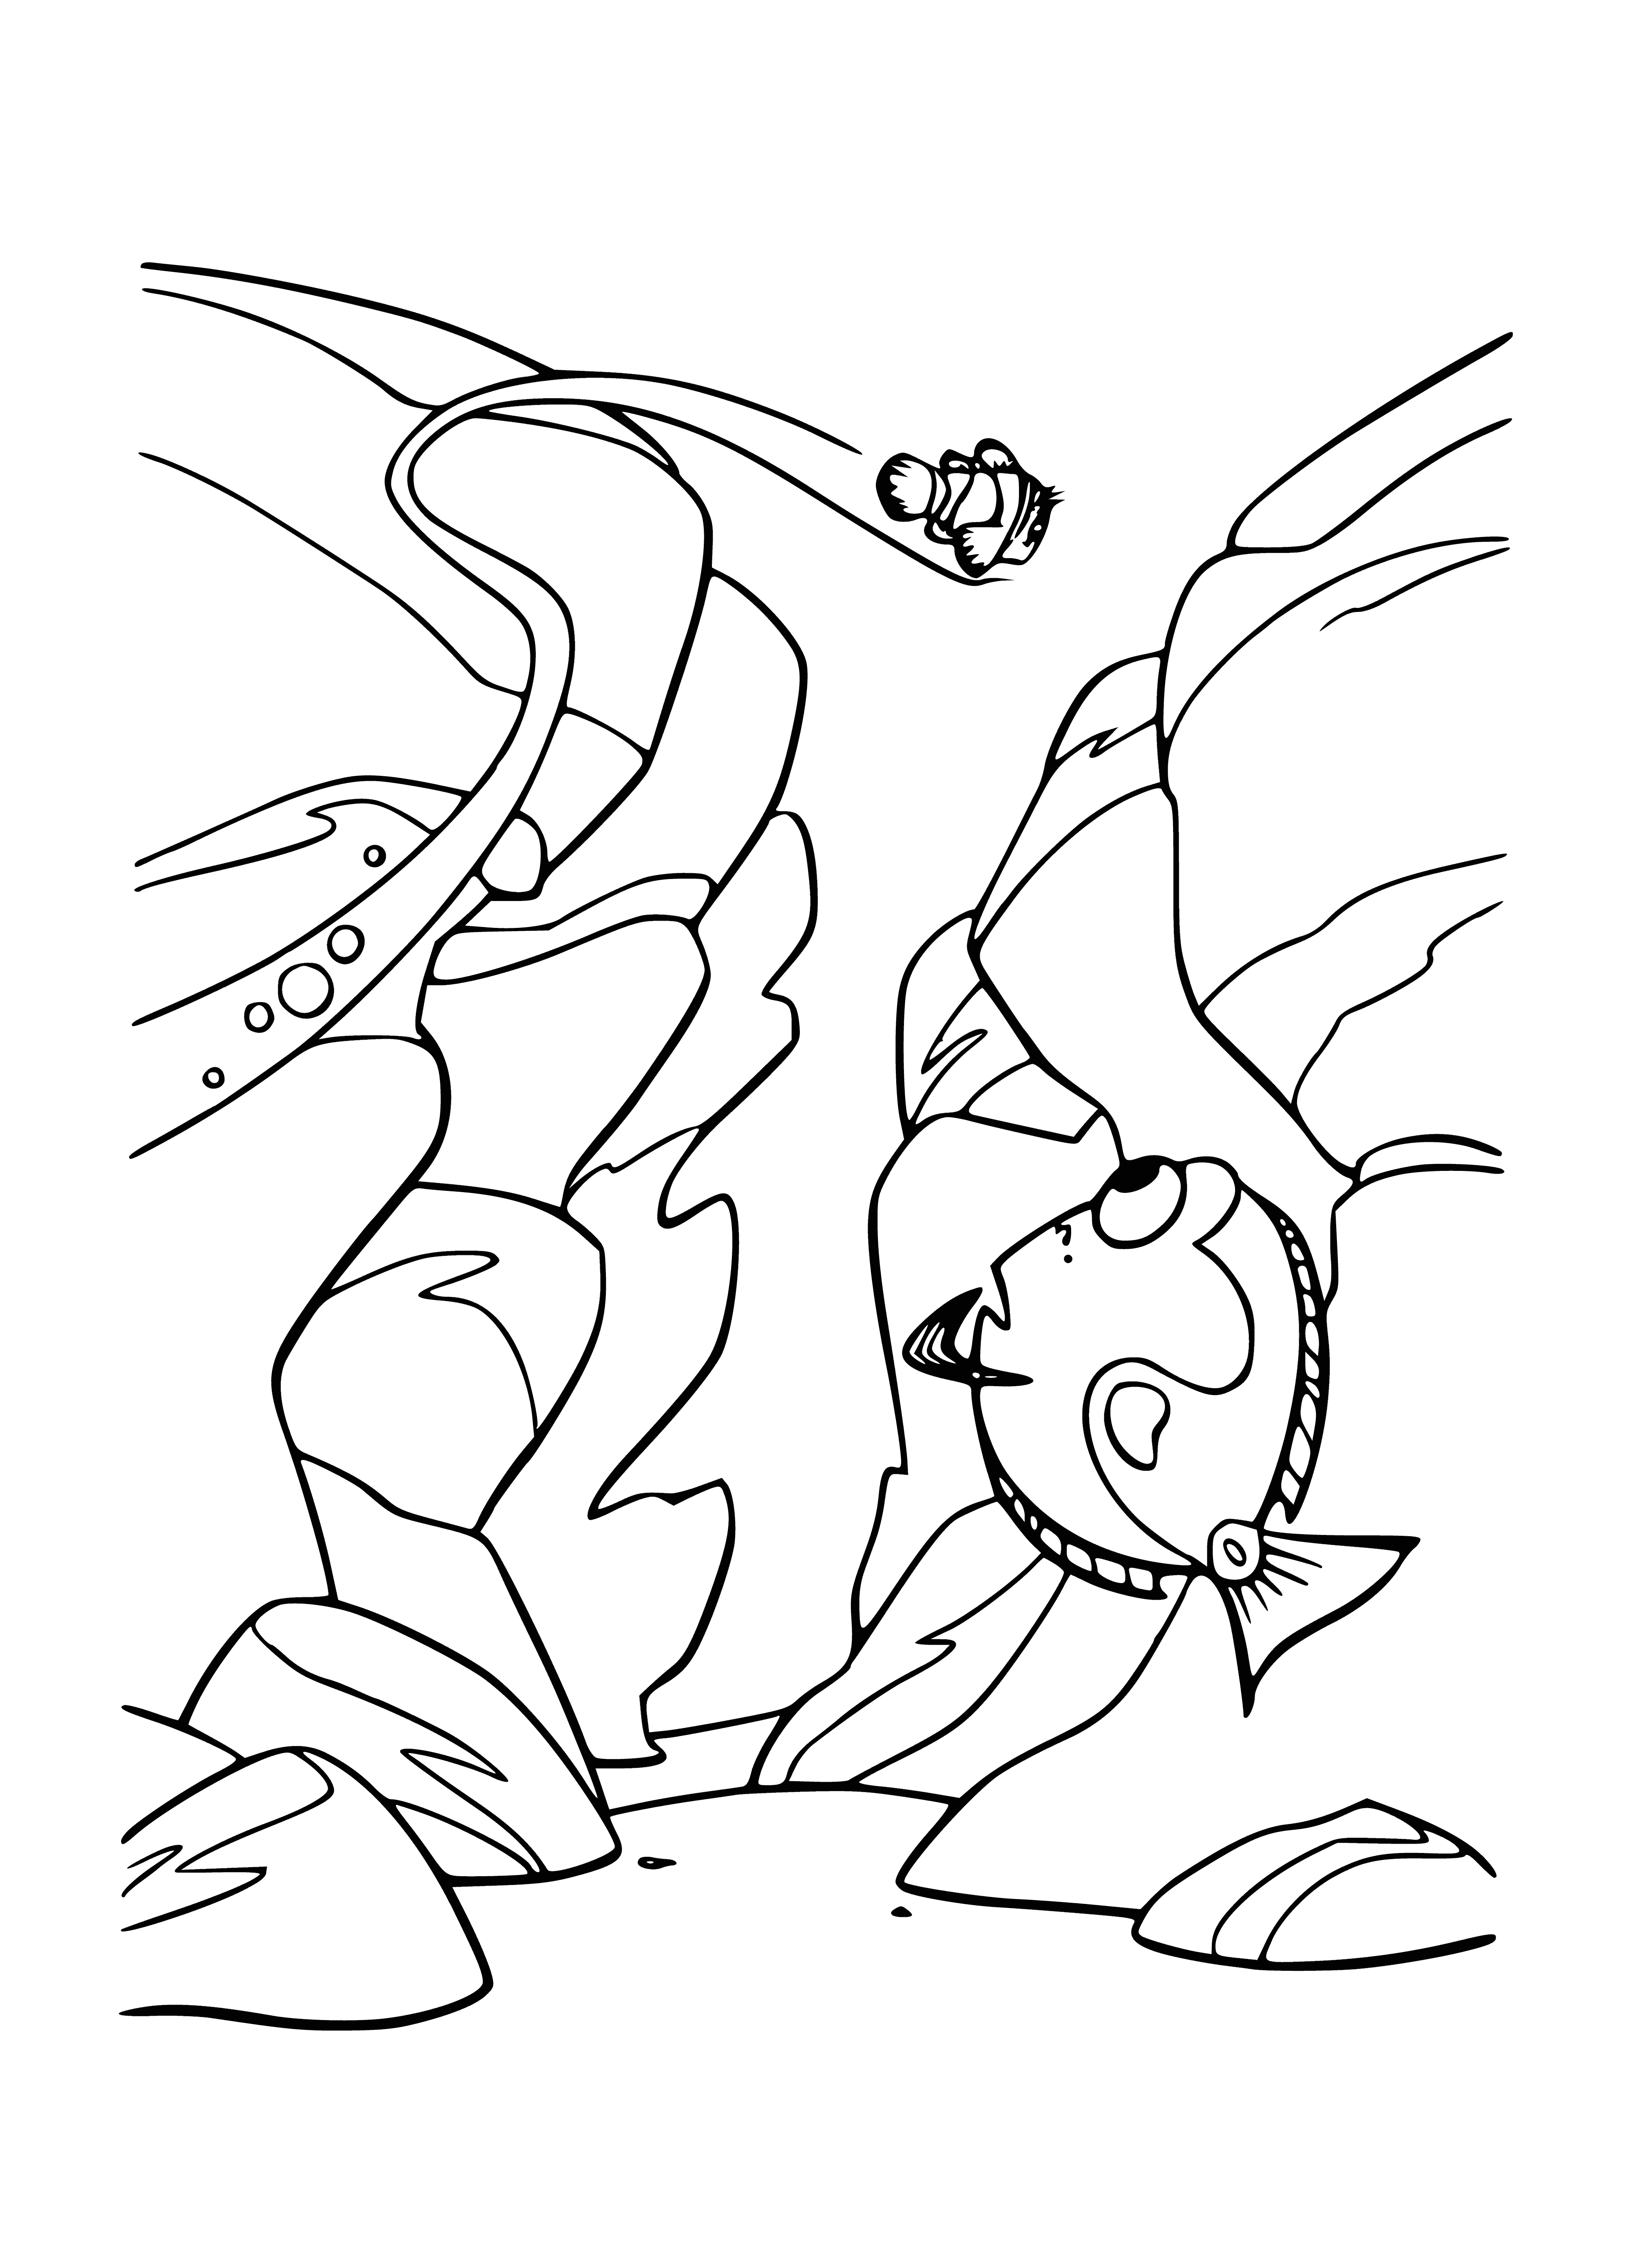 Gorge coloring page